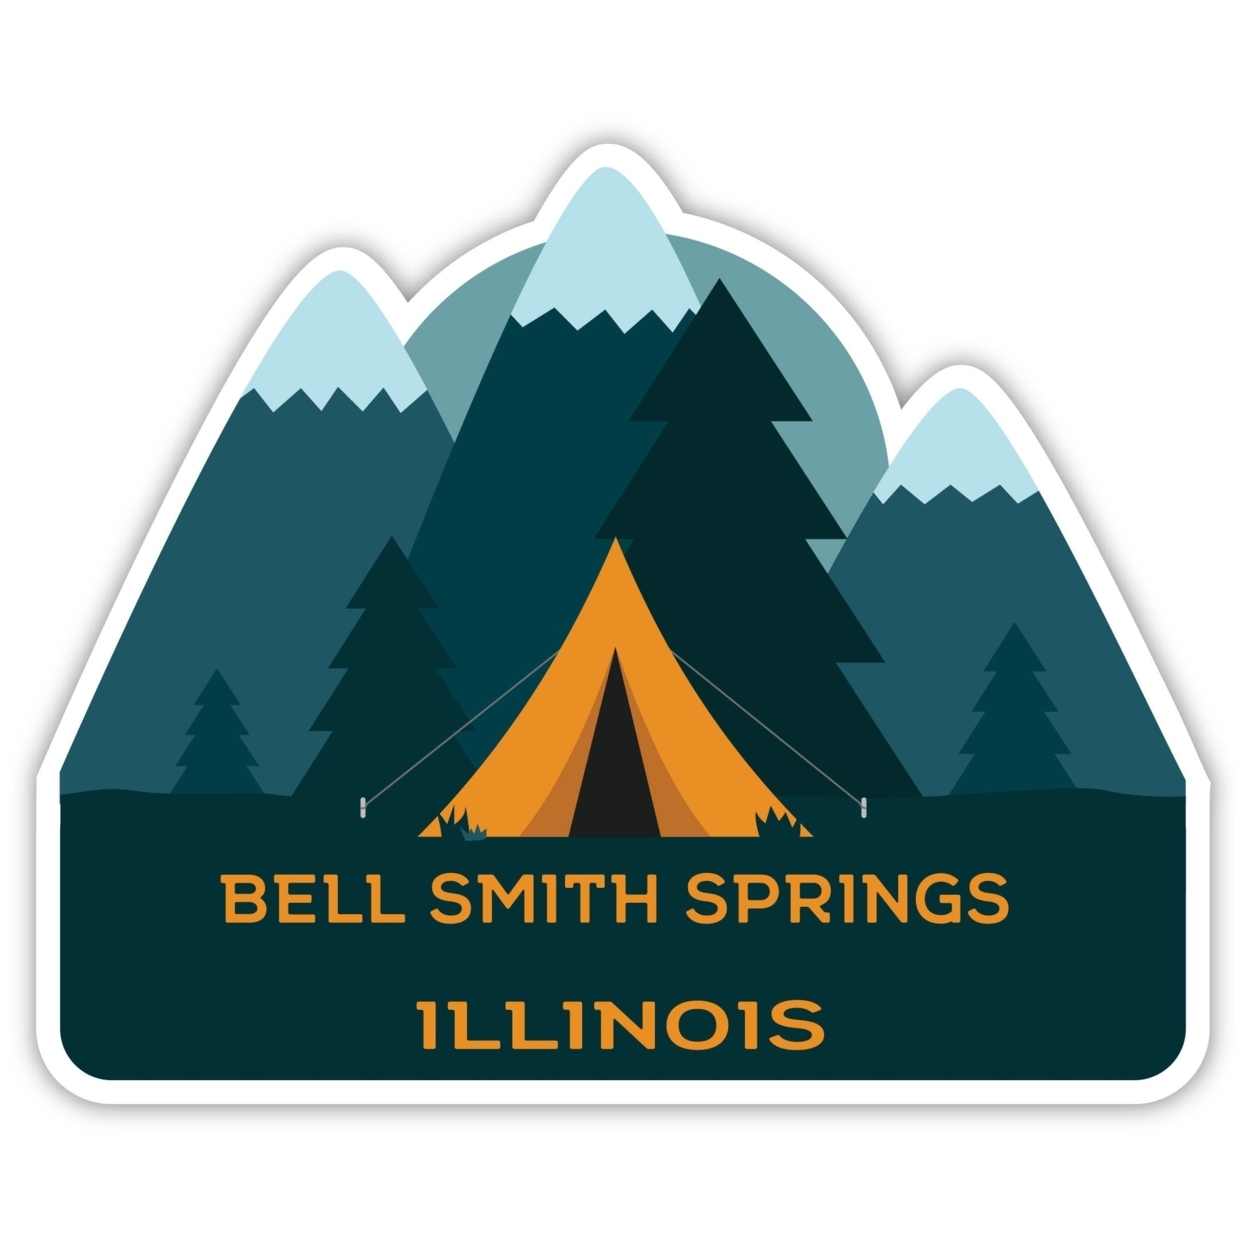 Bell Smith Springs Illinois Souvenir Decorative Stickers (Choose Theme And Size) - Single Unit, 2-Inch, Bear